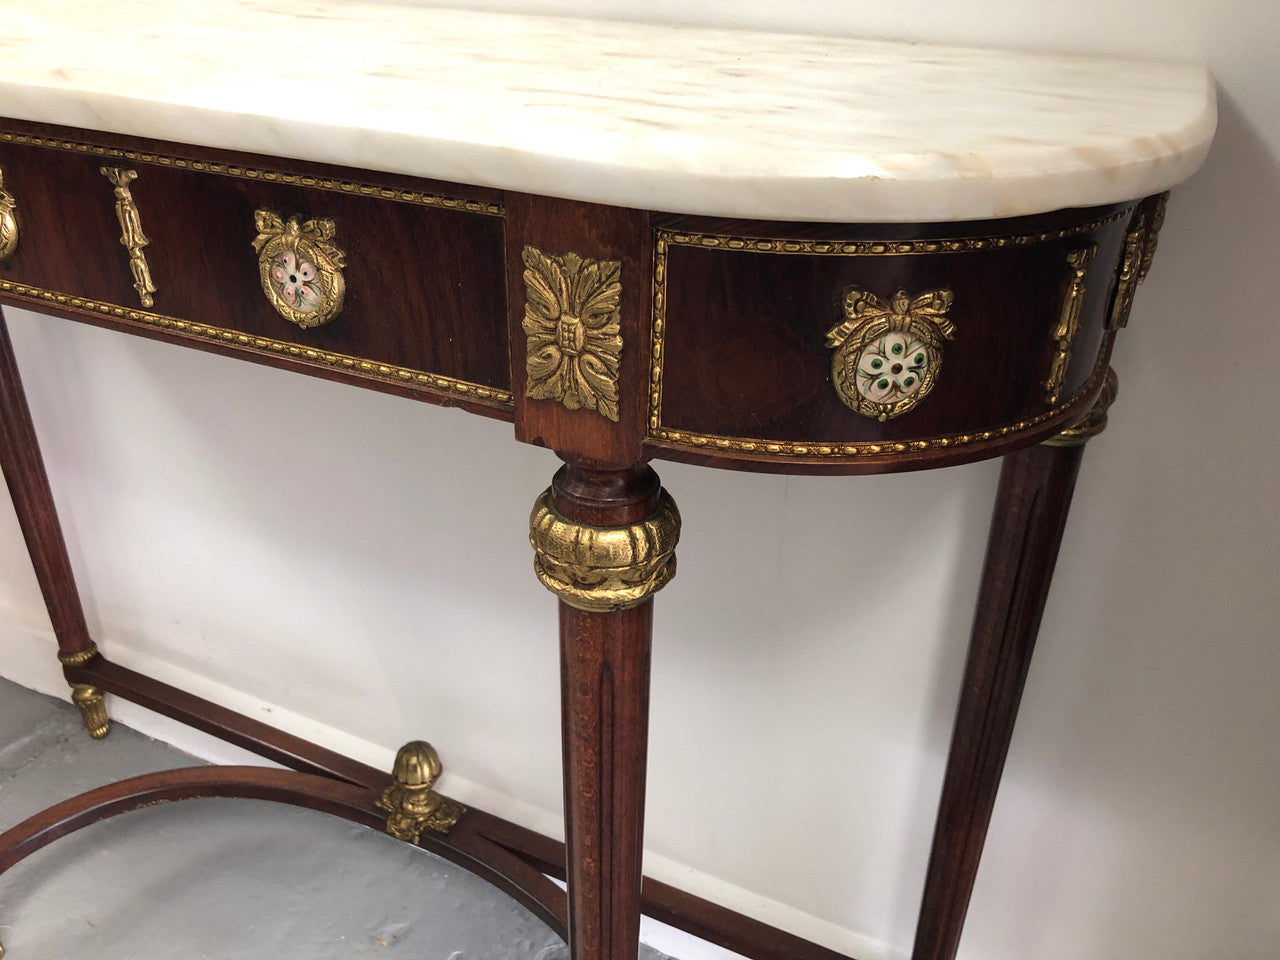 Narrow mahogany Louis XVI style console table with a marble top, ceramic inserts and gilt brass mounts.